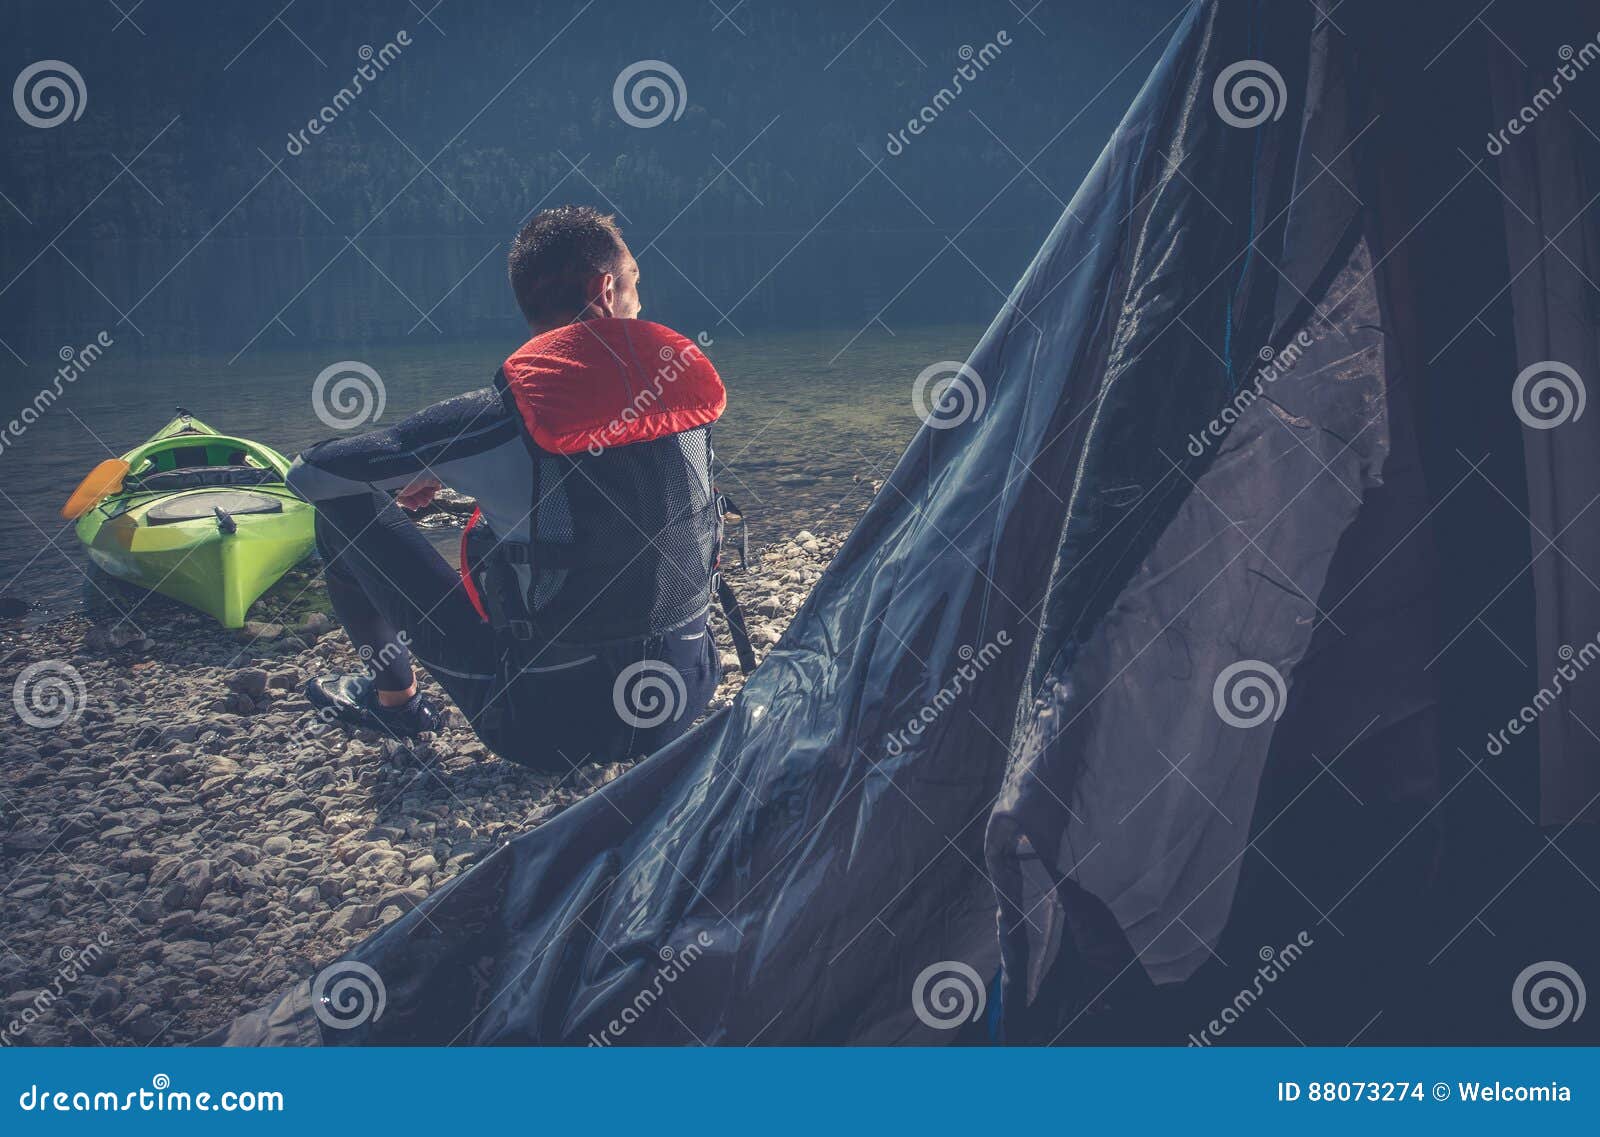 Outdoor Sportsman Camping stock photo. Image of campsite - 88073274